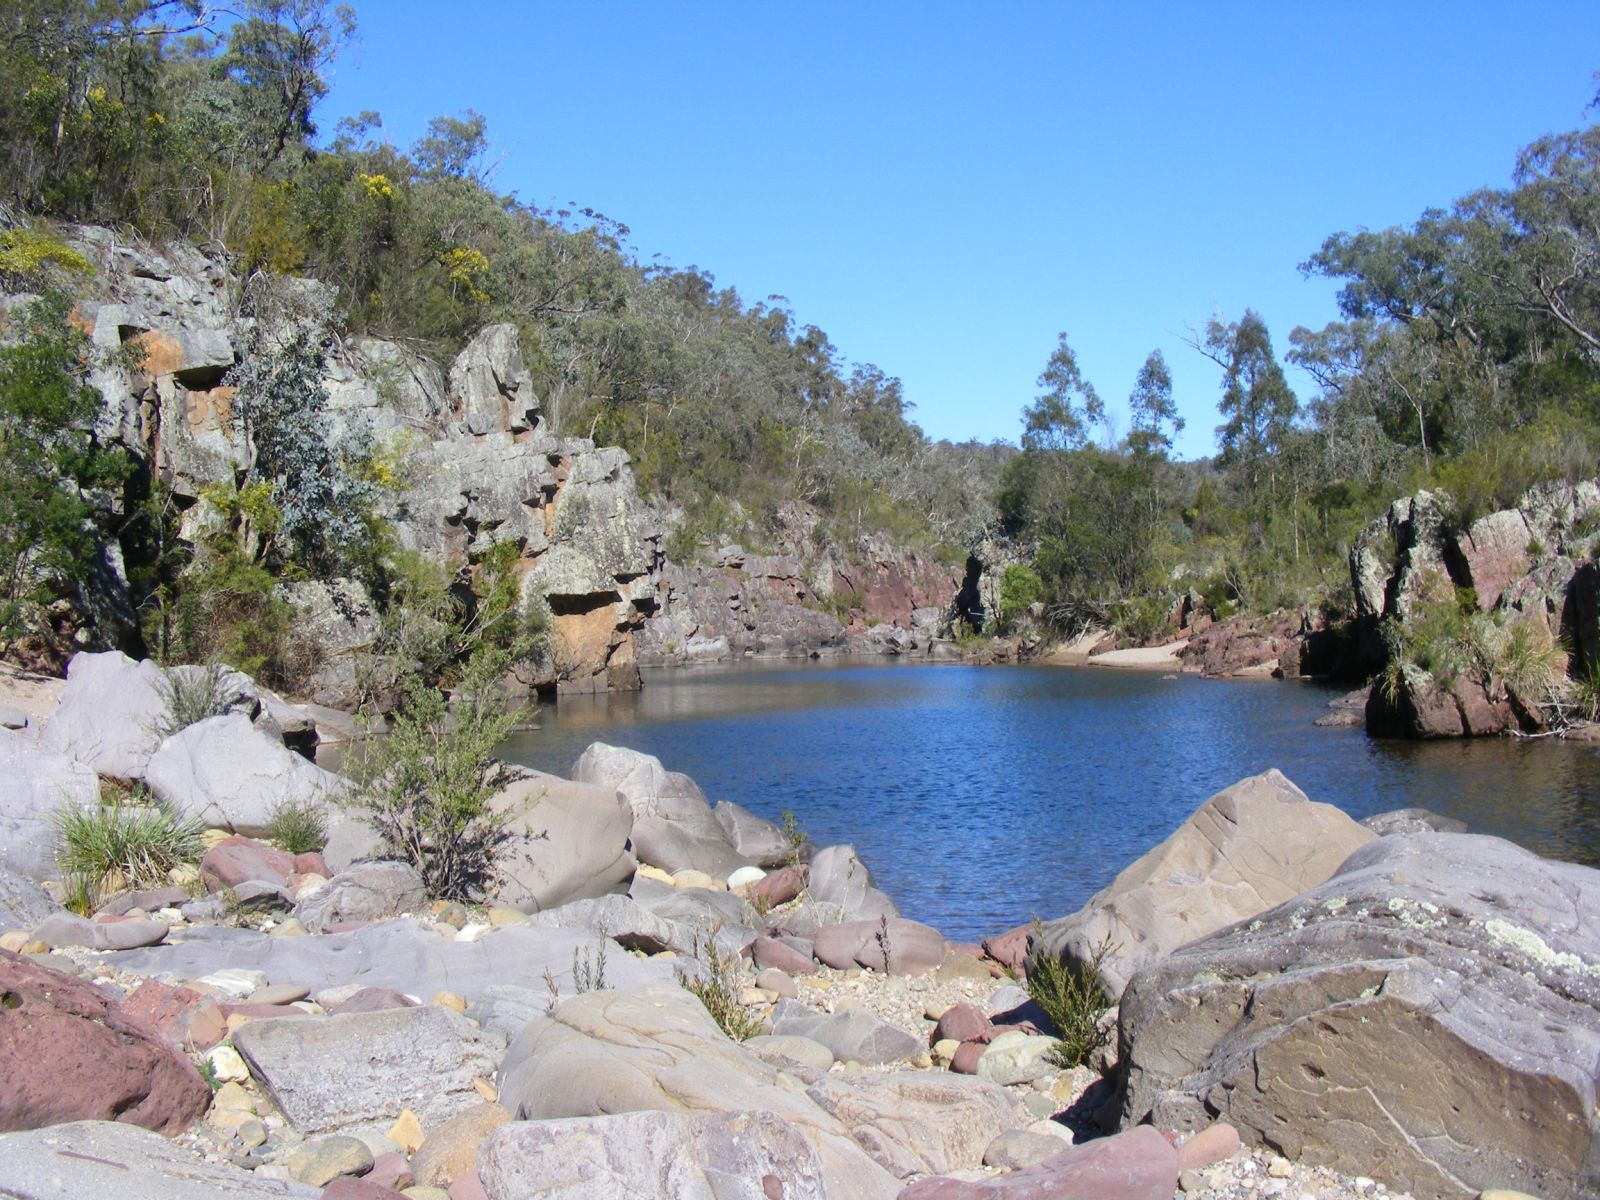 A view of the Channel Gorge with rocks in the foreground